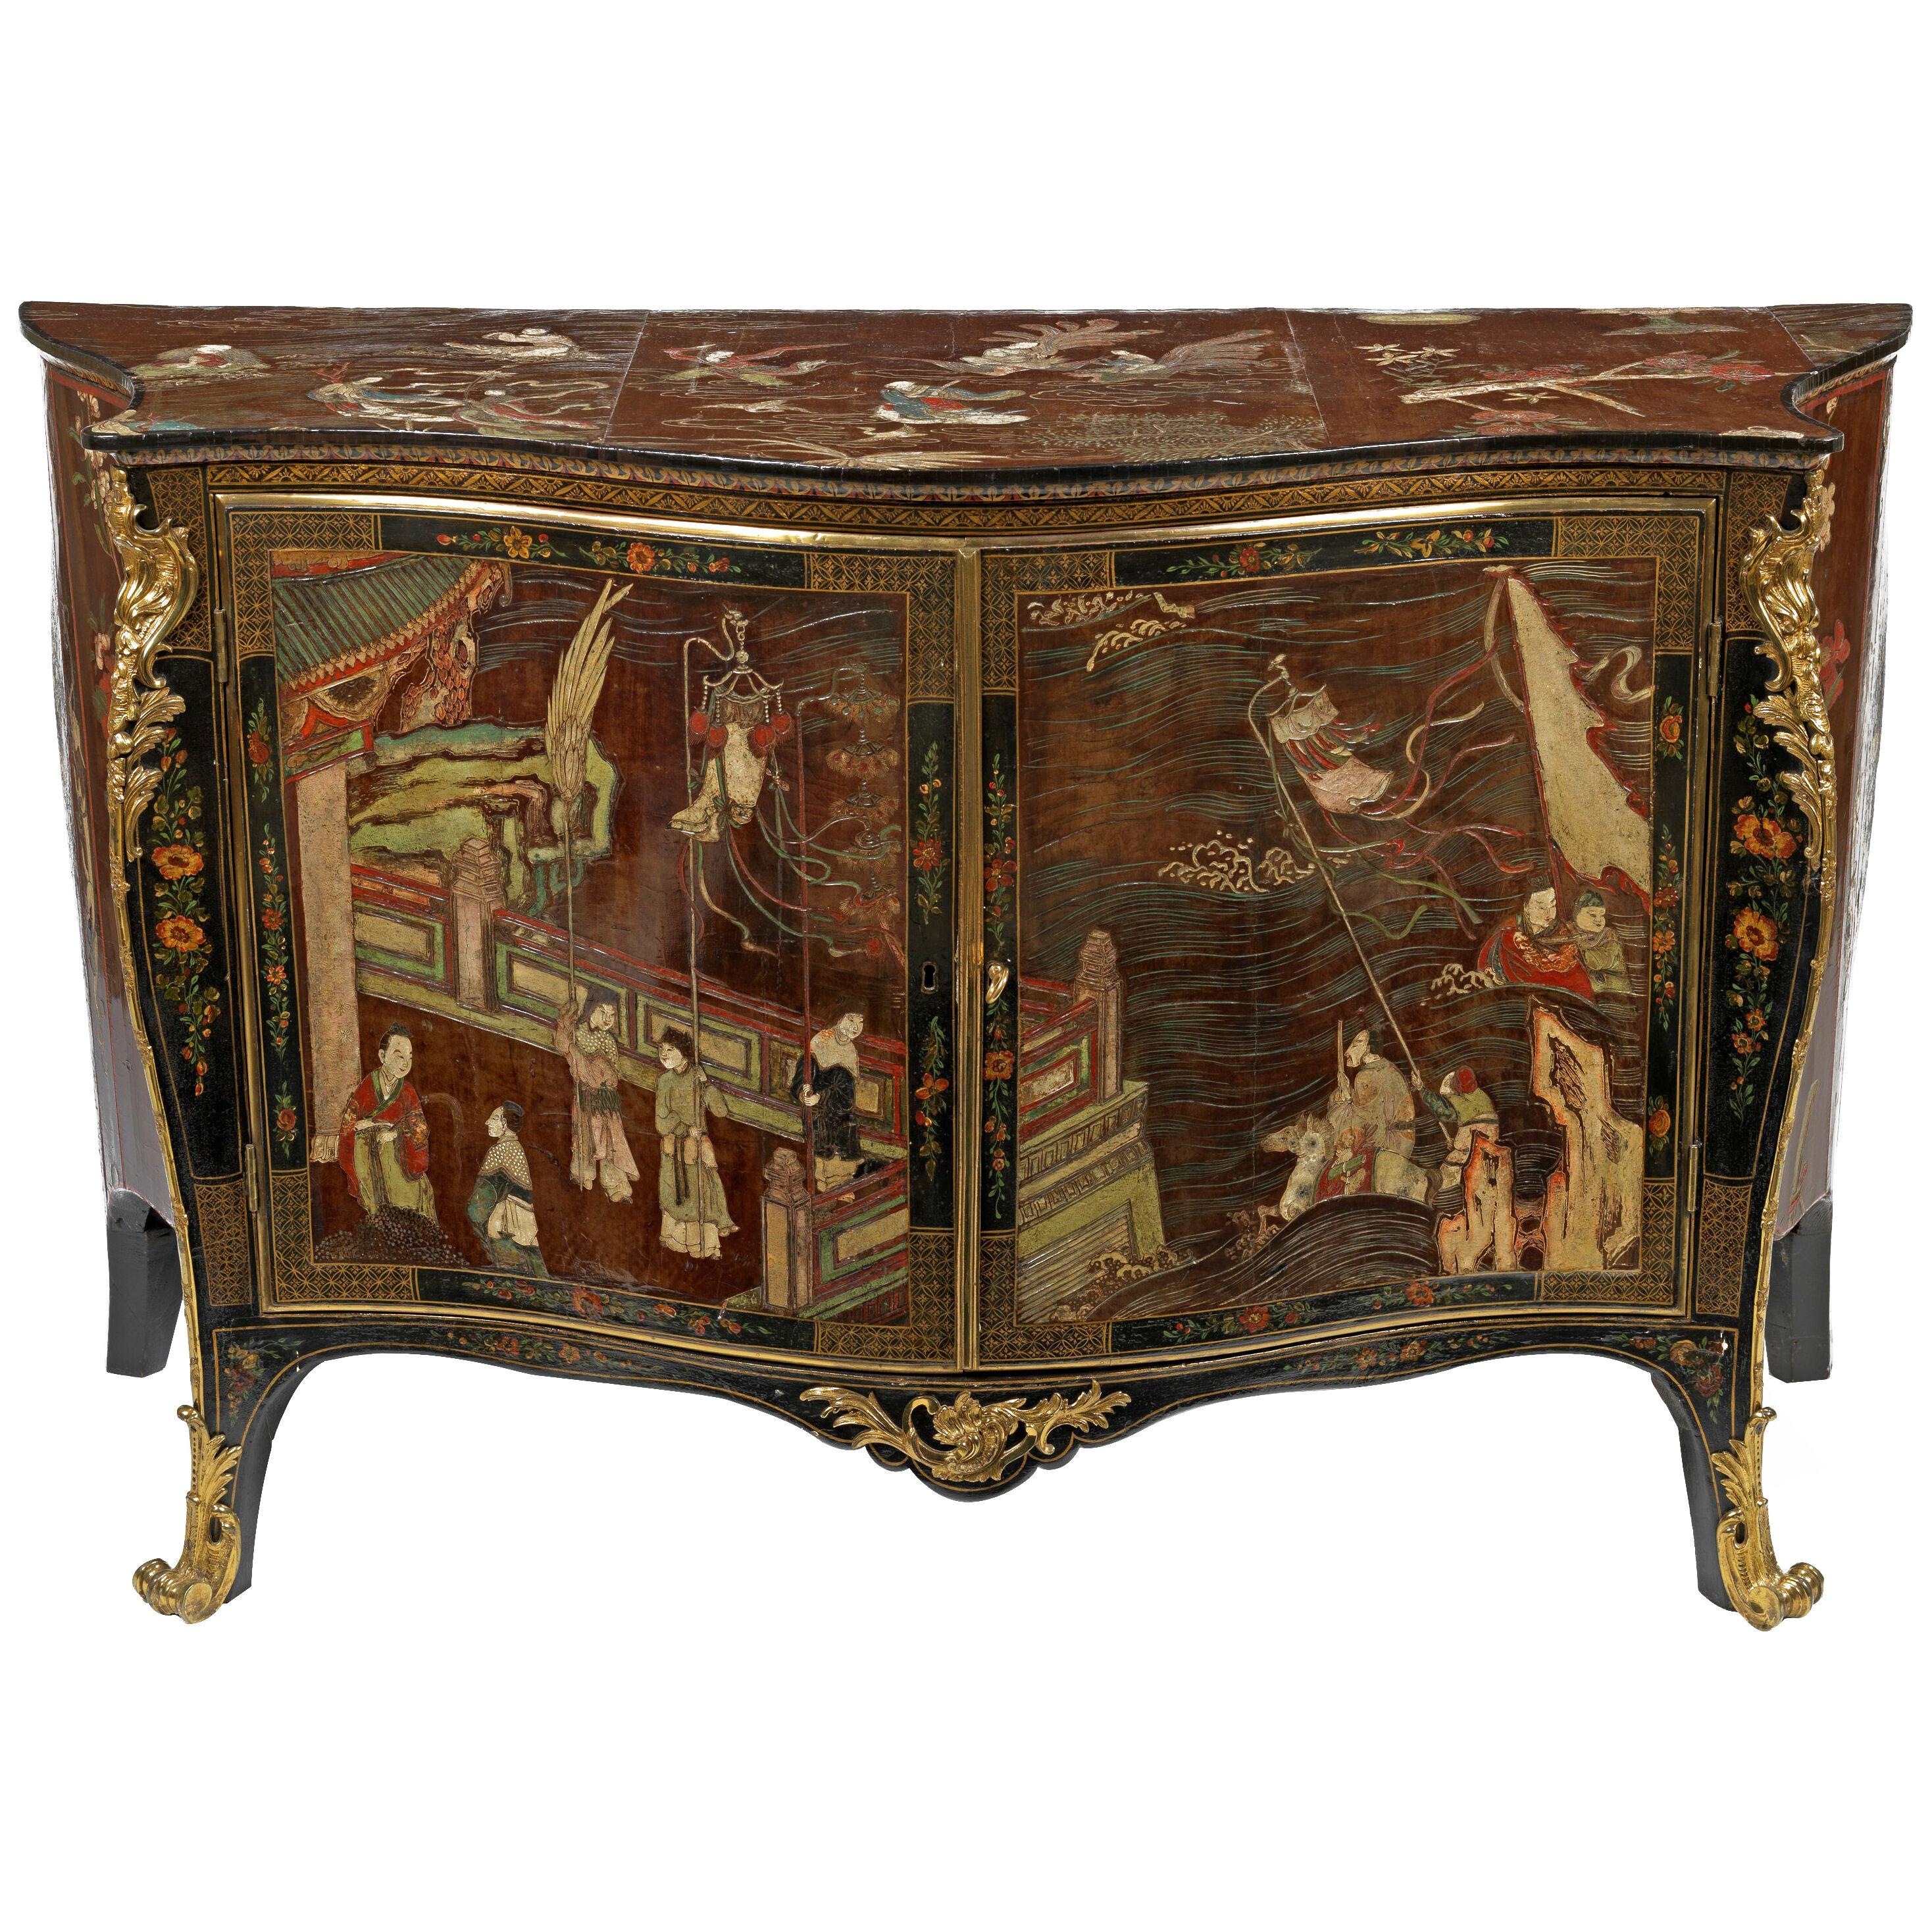 A George III Coromandel Lacquer, gilt-brass mounted serpentine commode